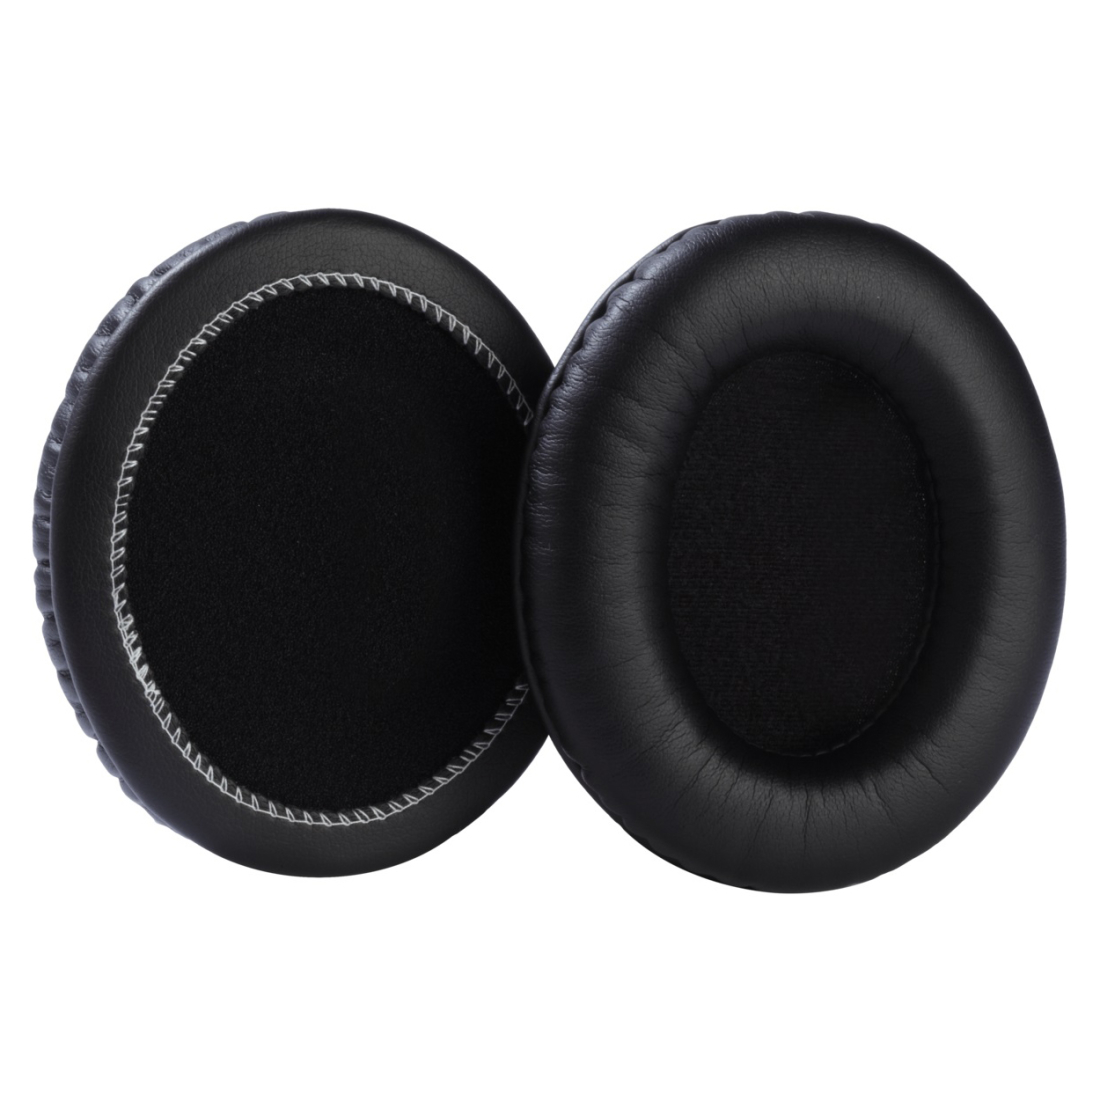 Replacement Ear Cushions for SRH840A